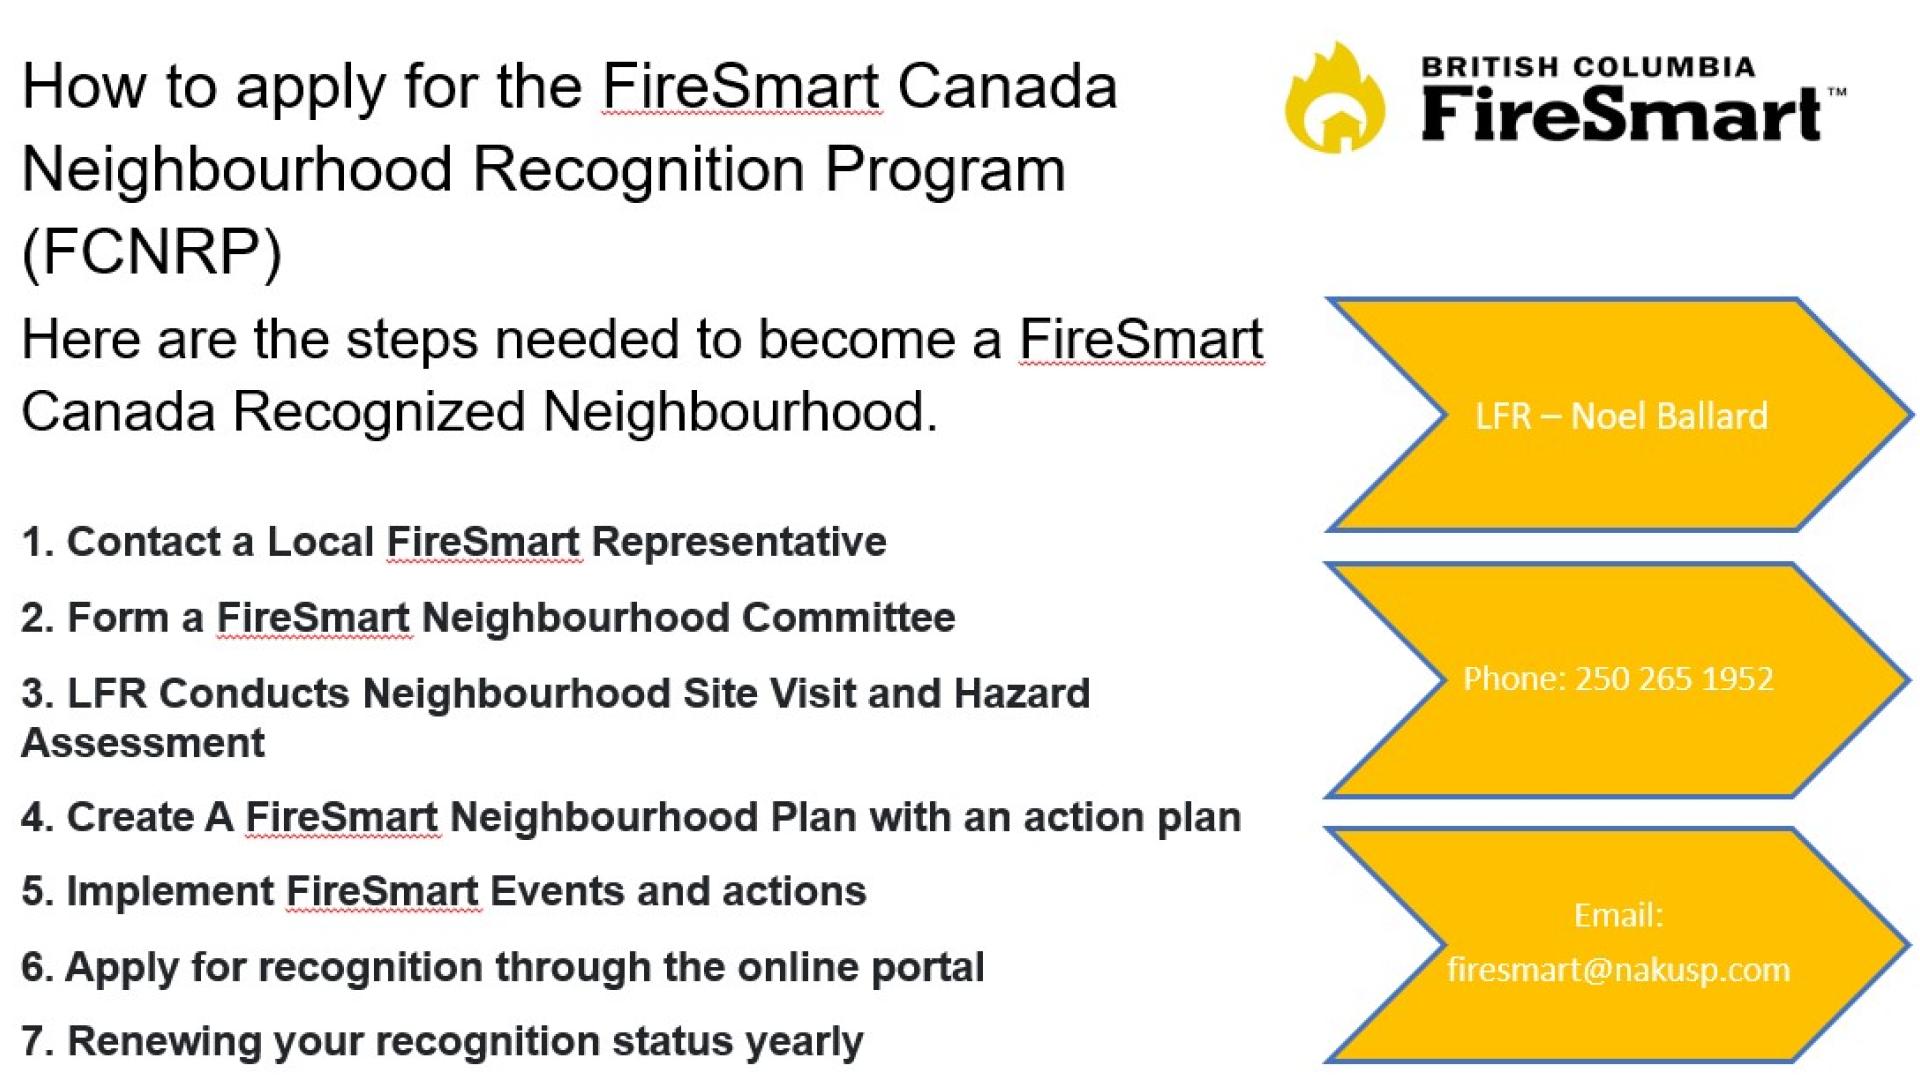 Informative graphic detailing how to apply for the FireSmart Canada Neighbourhood Recognition Program.